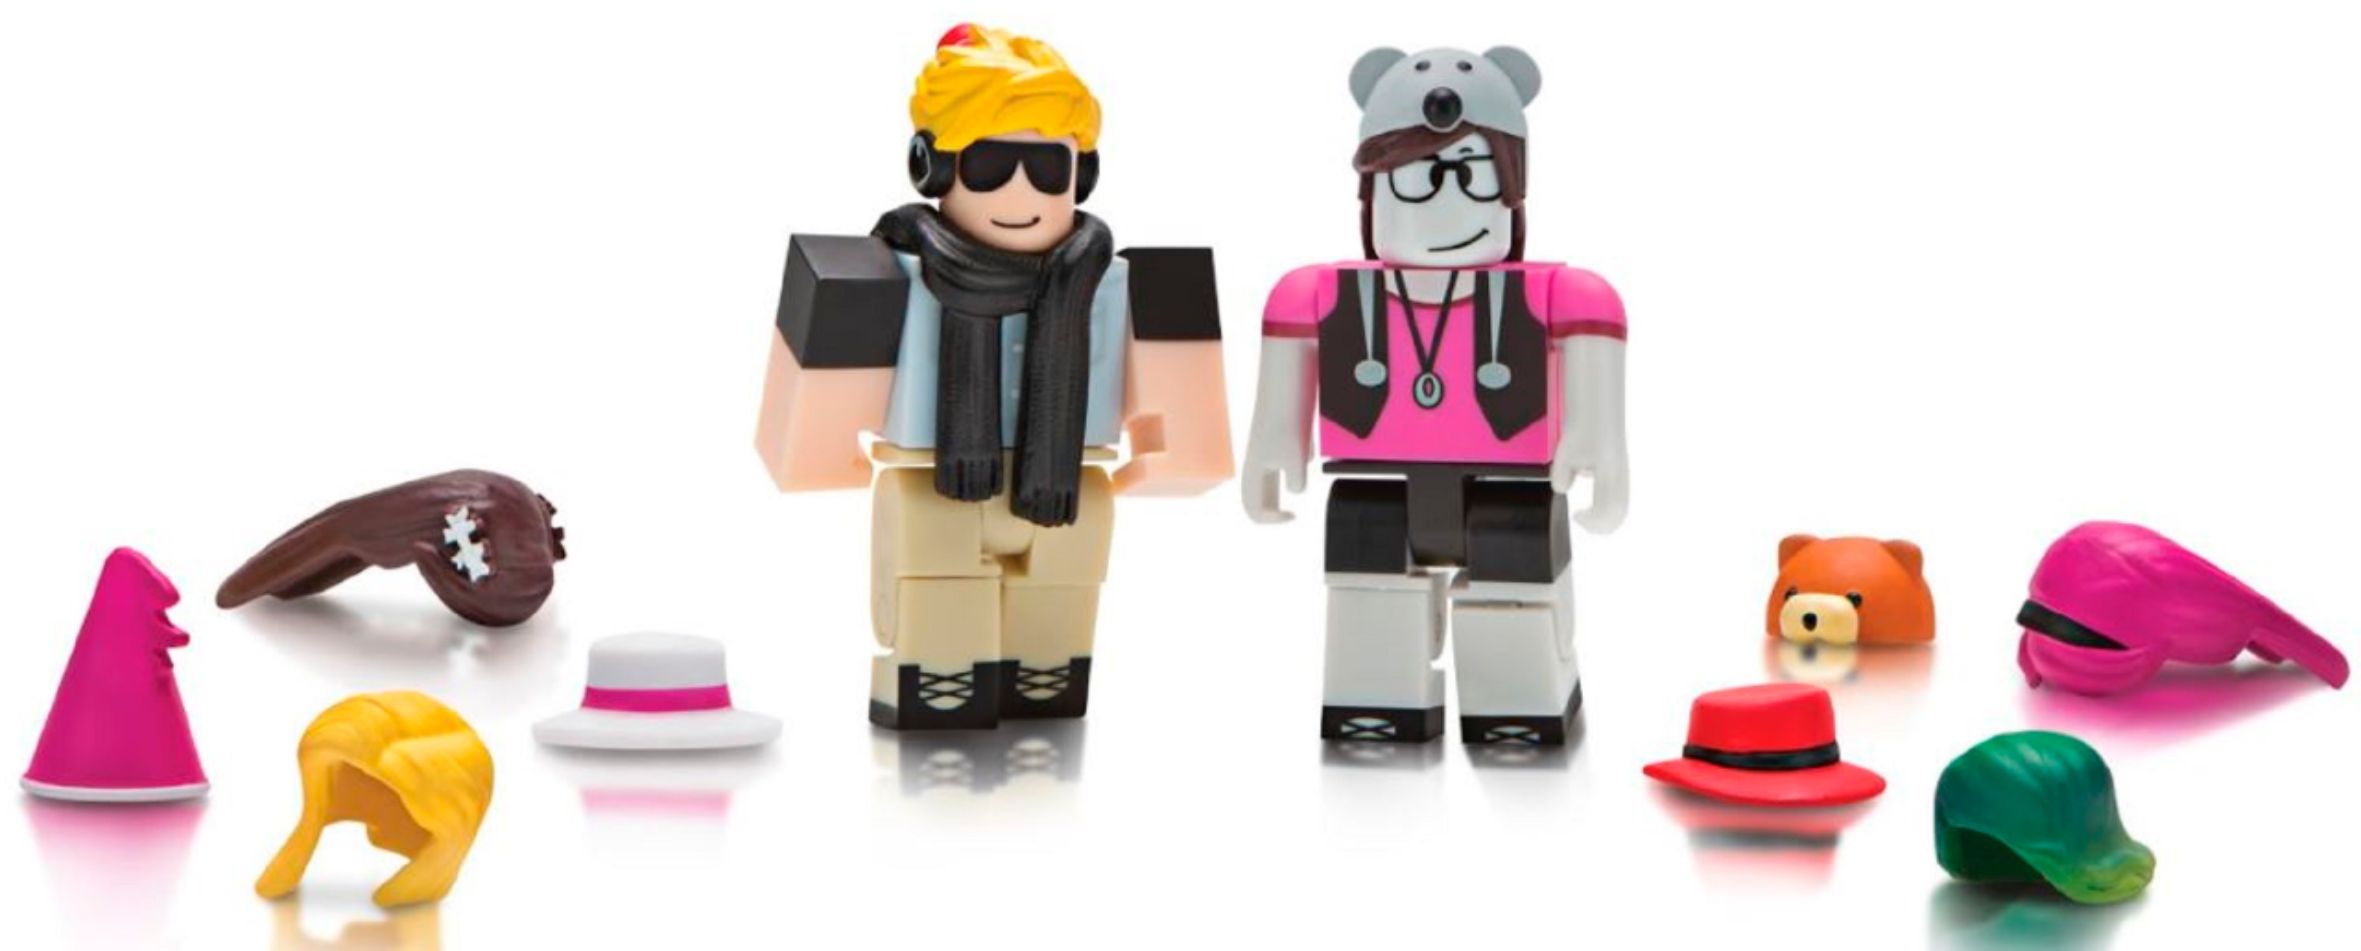 Roblox Celebrity Game Pack Styles May Vary - roblox celebrity mini figures wheres the baby